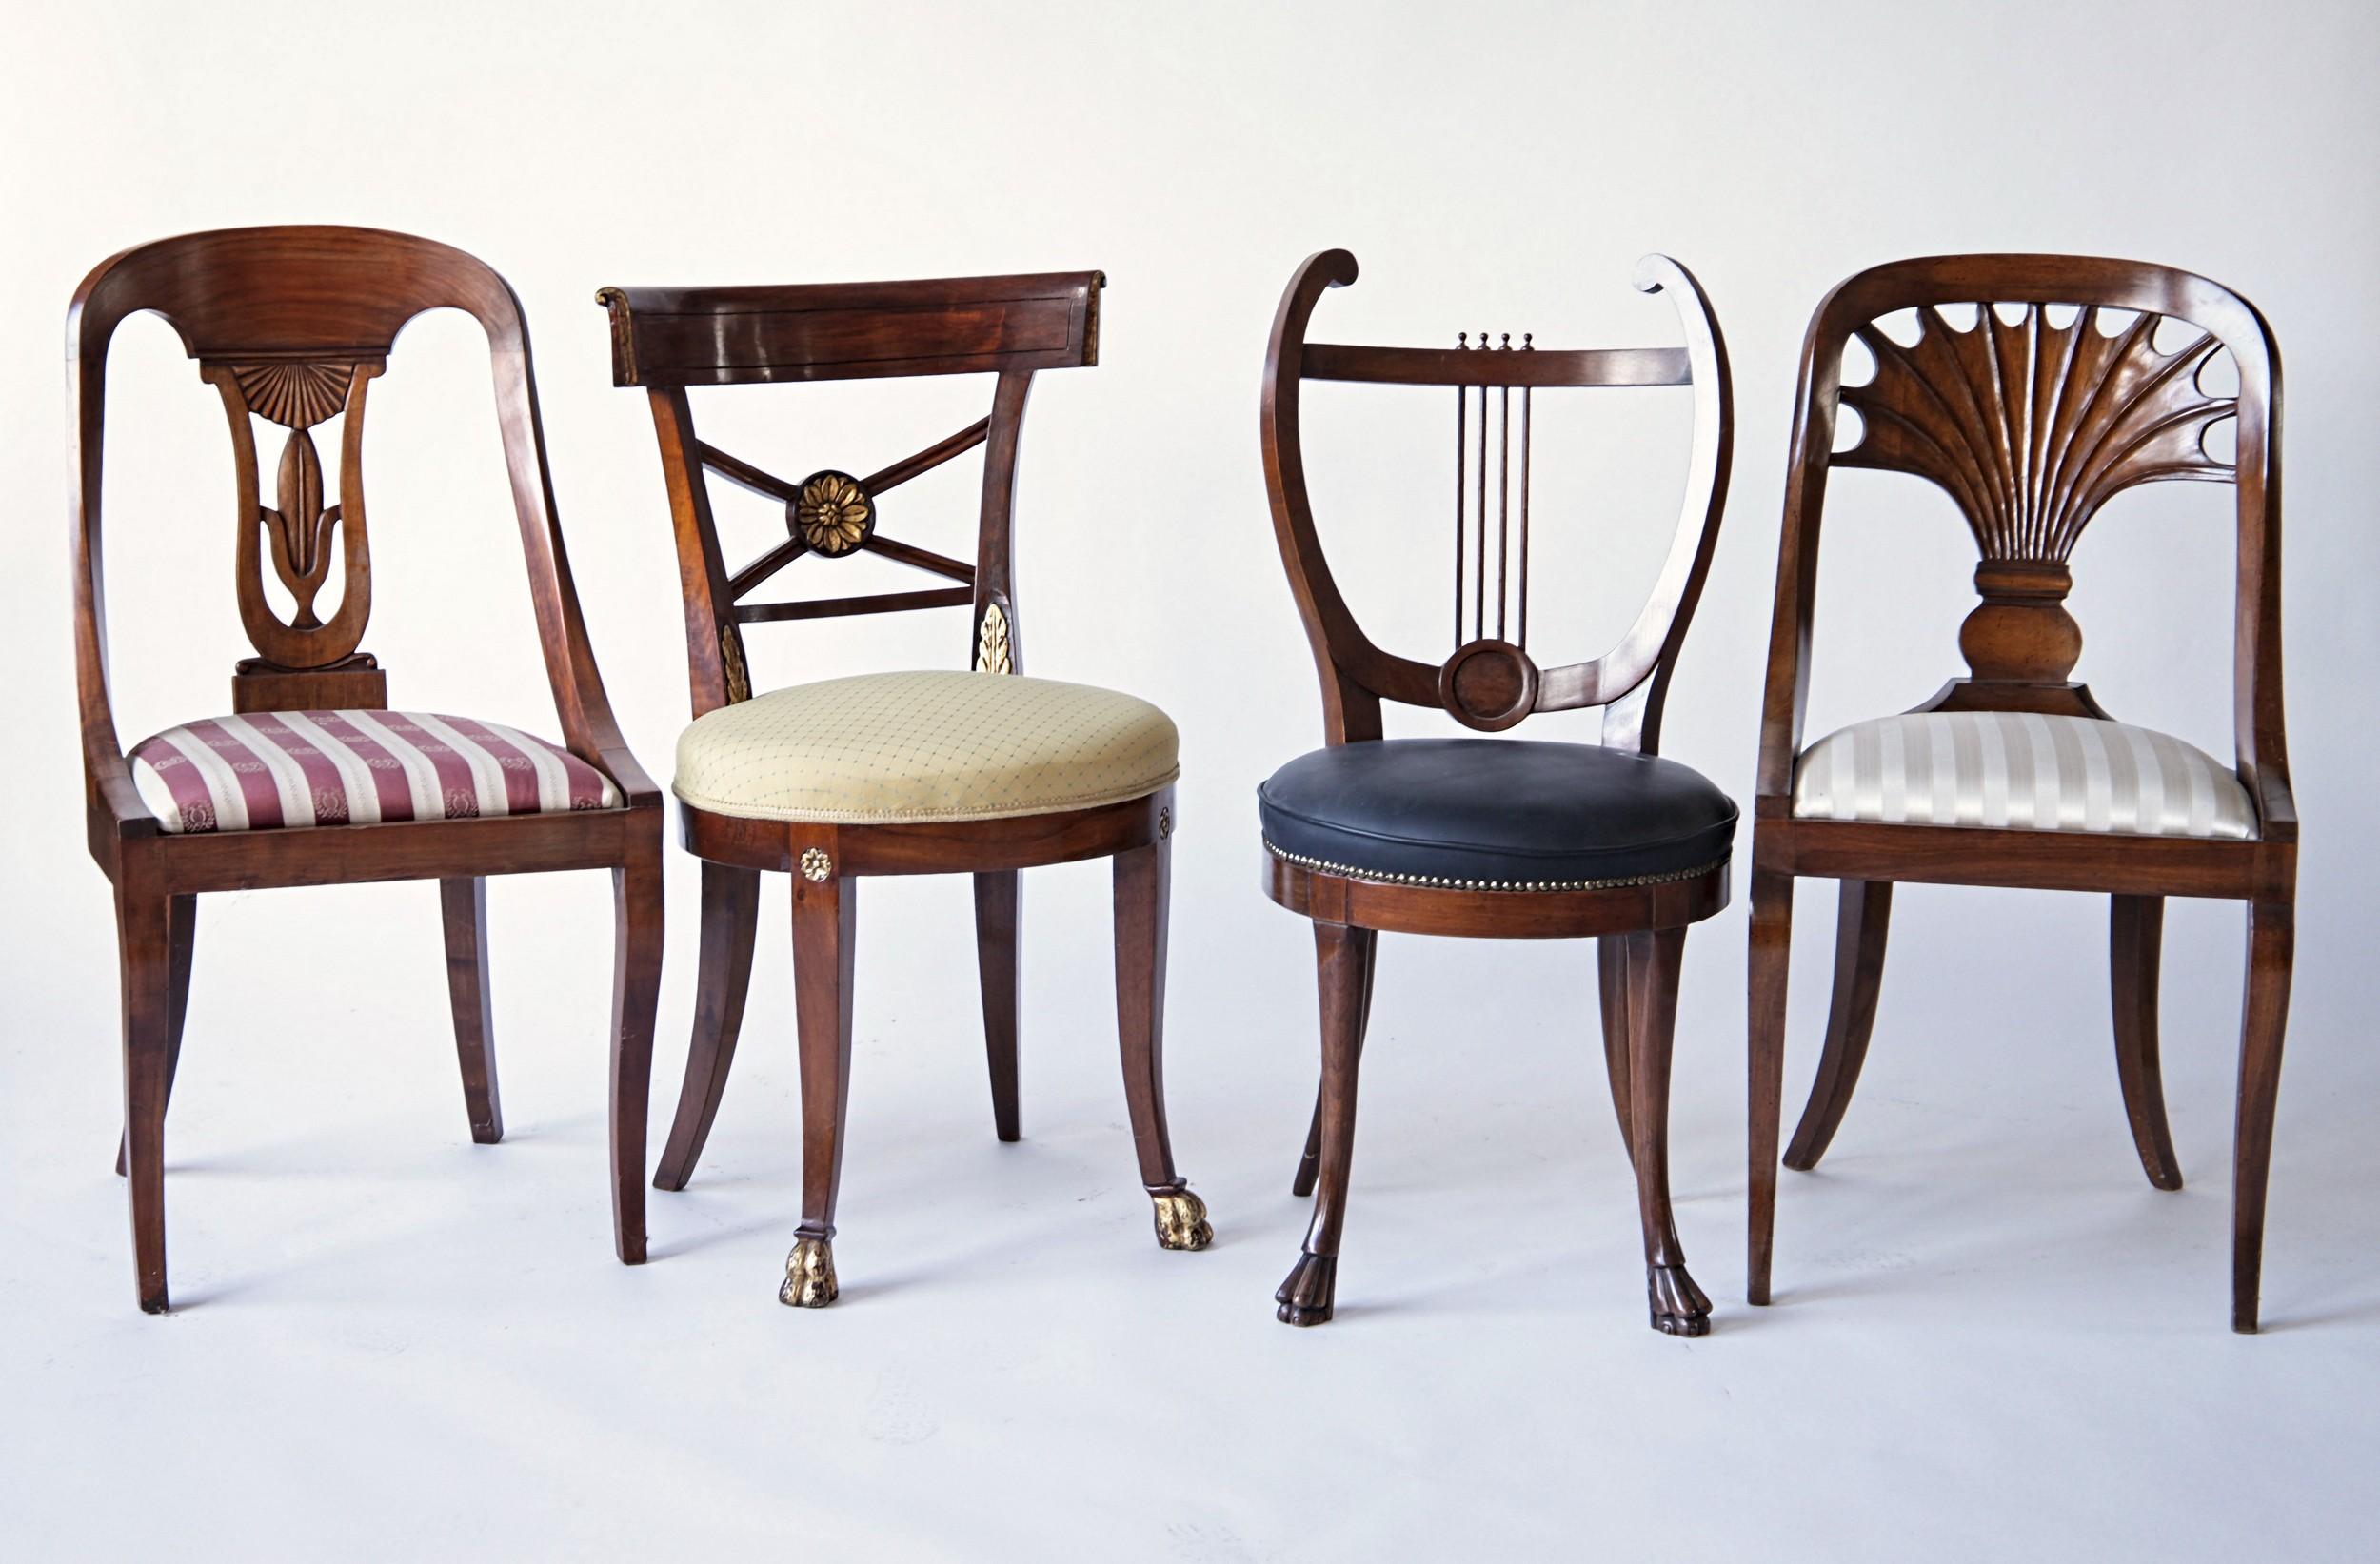 Empire set. Made of eight different style of chairs. The differentiation in stile and the shapes are each gorgeous.

An profusion of cherry, walnut wood and carvings, lion feet, lira shape, bas-relief details and on and on. Just take a look of